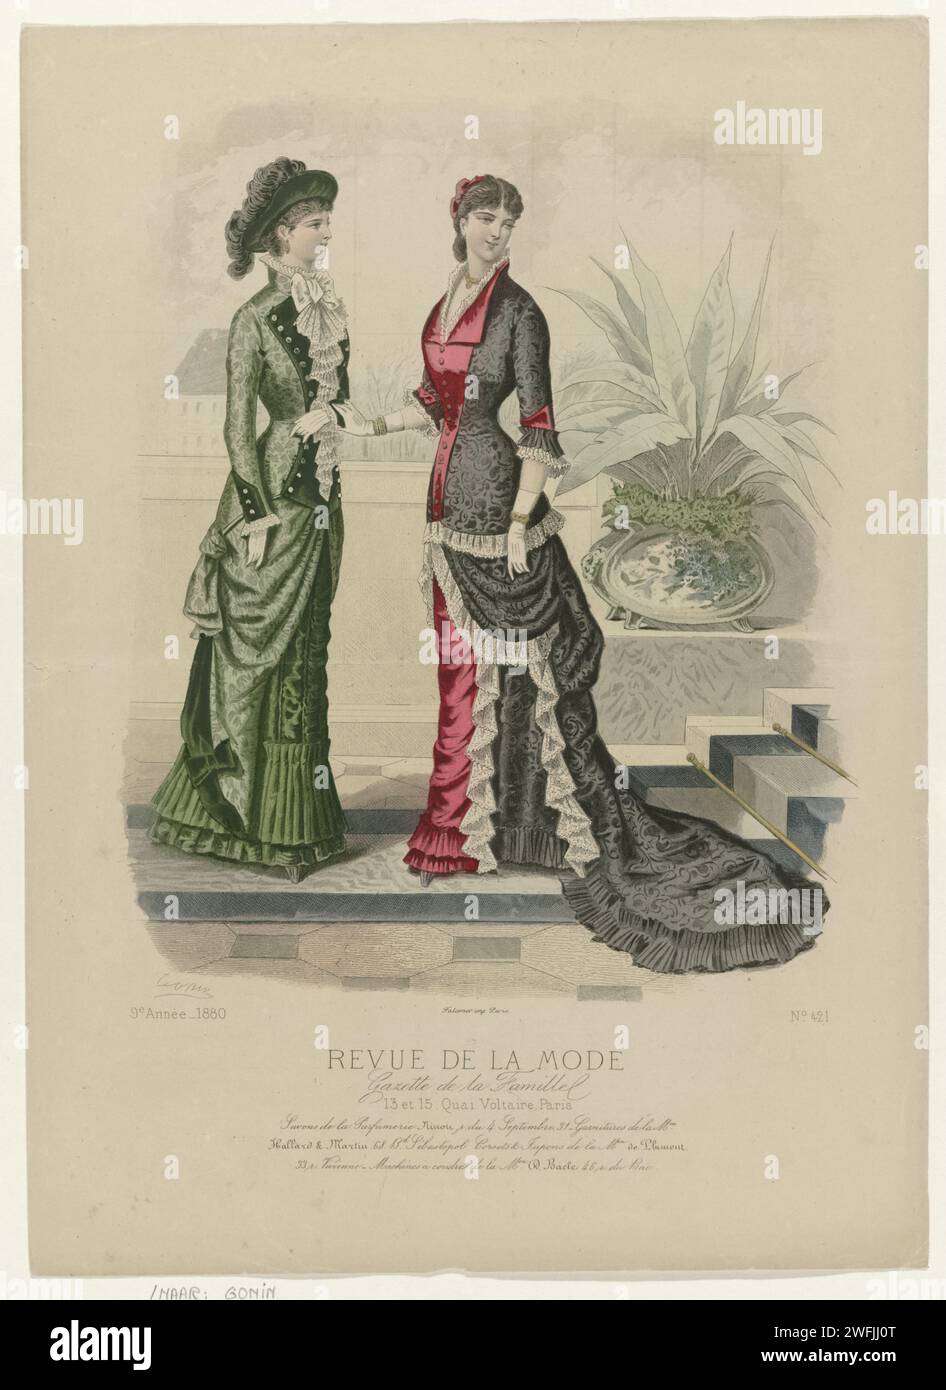 Fashion review, family gazette, Sunday January 25, 1880, 9th year, No. 421: Savrepumeri soaps (...), Guido Gonin, 1880  Two women on a terrace with garden vase. Left: 'Toilette de Ville'. Right: dress for a soirée and reception. Under the performance some lines of advertising text for different products. Print from the fashion magazine Revue de La Mode (1872-1913). Detailed description of the clothing on page 38 'planche coloriée'. Paris paper engraving fashion plates. dress, gown: evening dress (+ women's clothes). skirt (+ women's clothes). head-gear: hat (+ women's clothes). necklace (+ wom Stock Photo